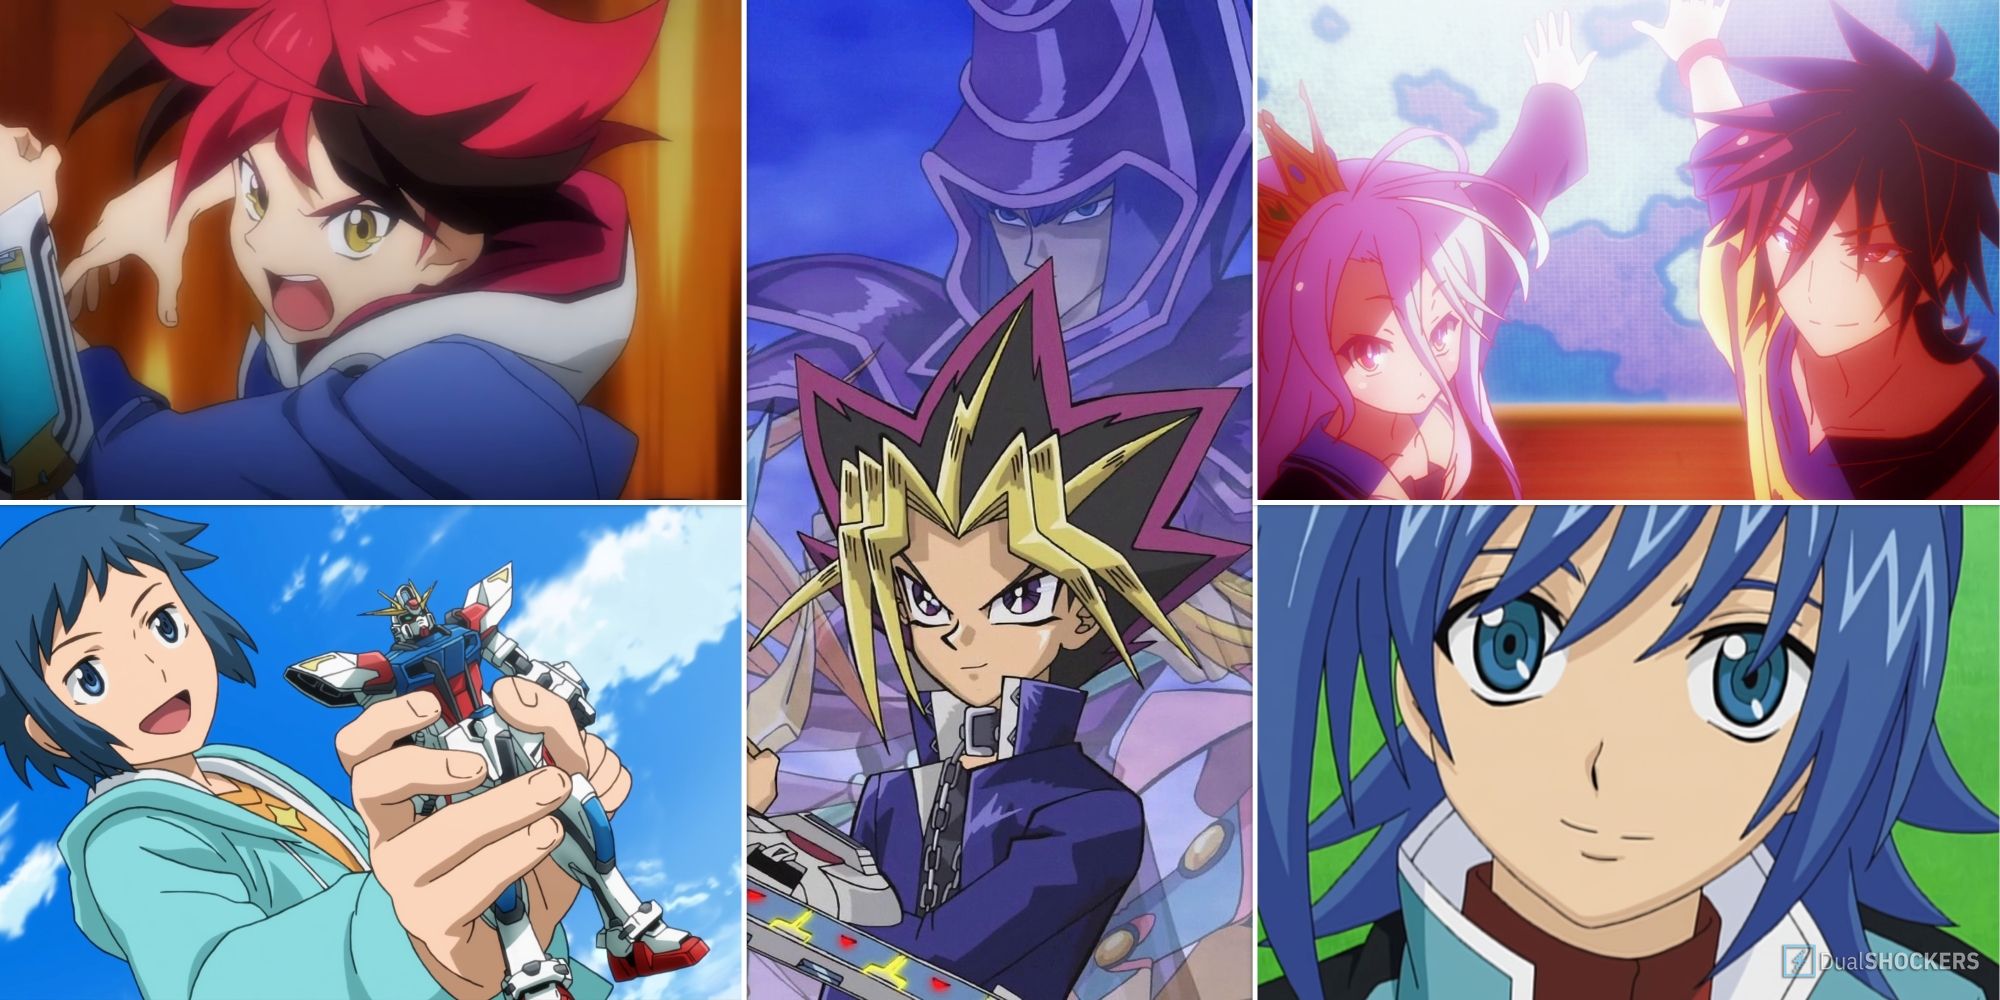 Top 10 Iconic Spell Cards in YuGiOh  Articles on WatchMojocom